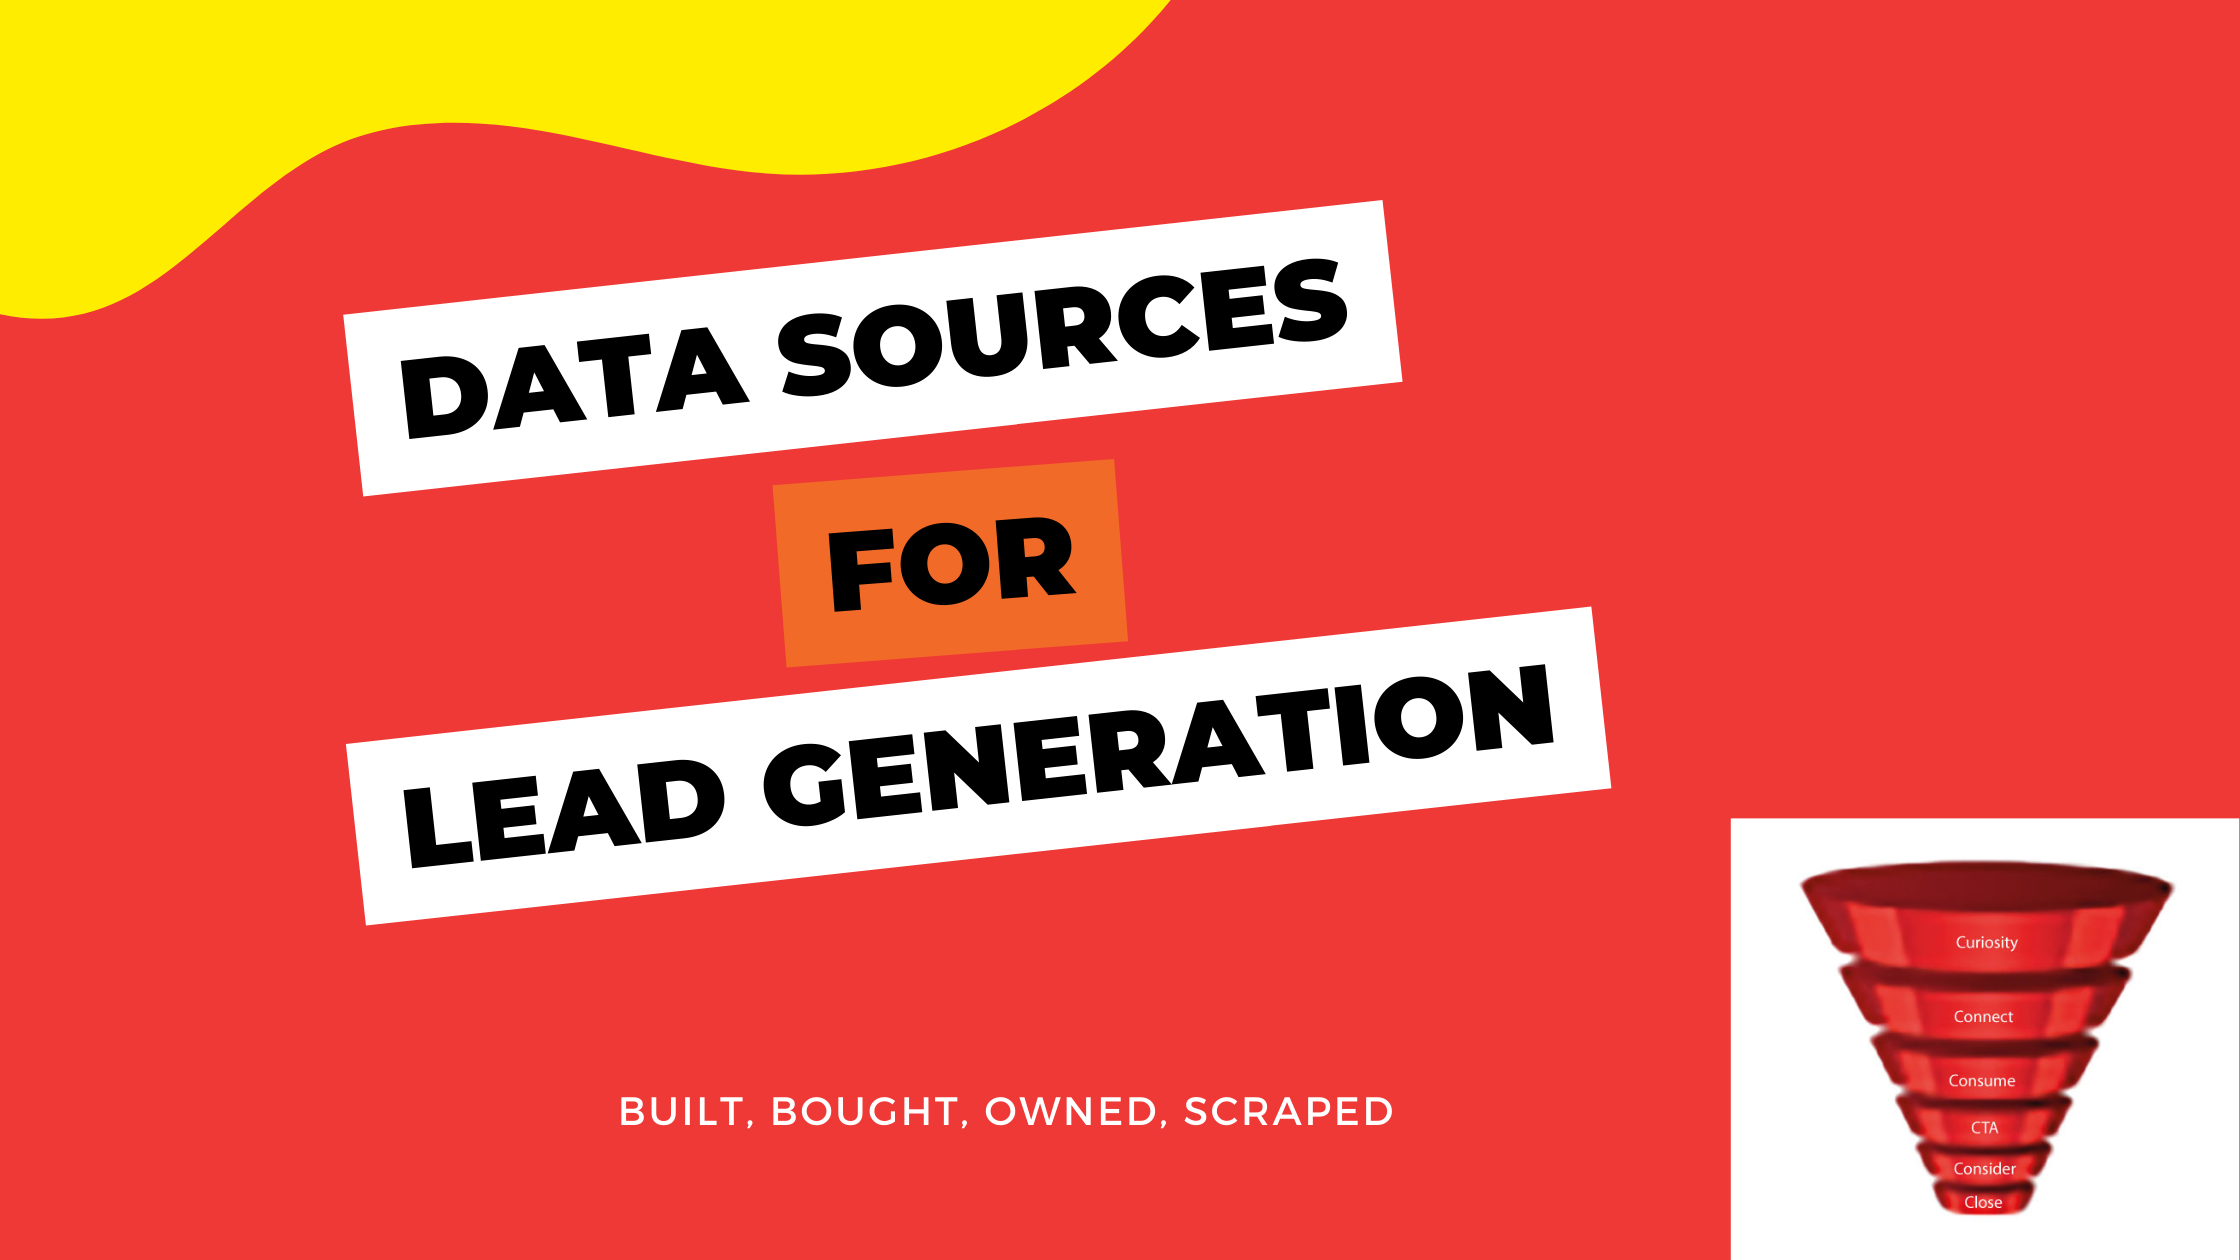 Data sources for lead generation success